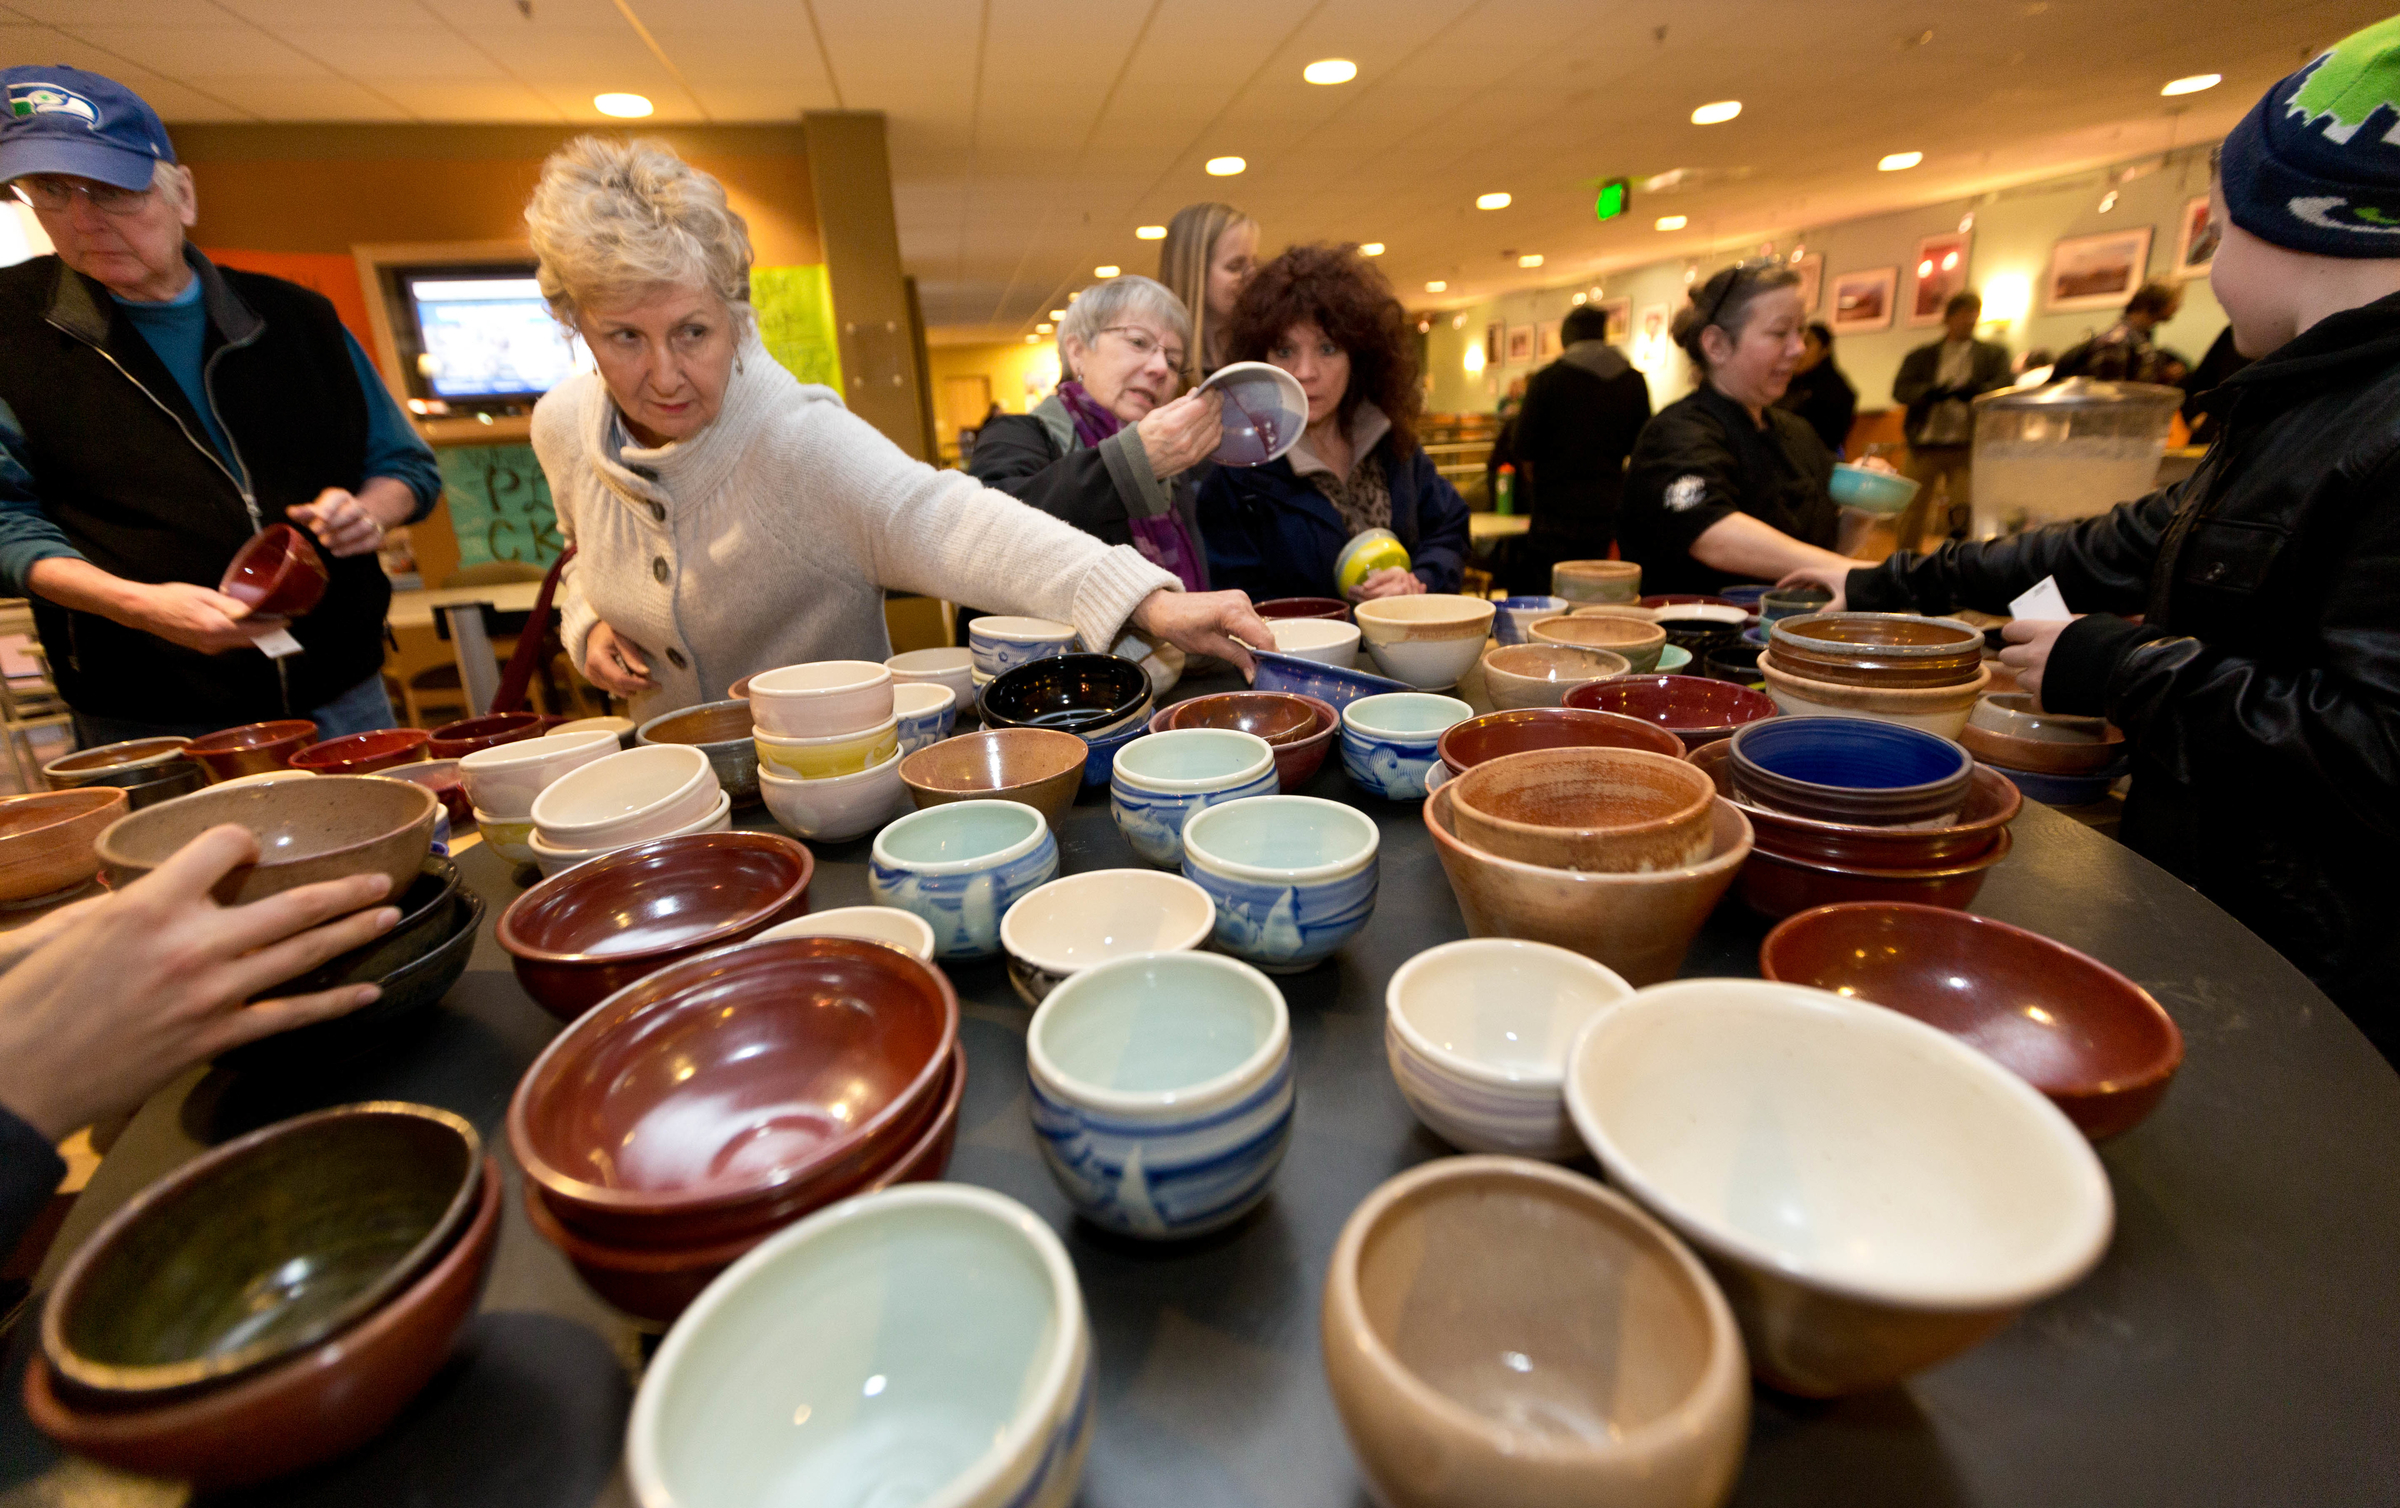 Empty Bowls with bowls my by PLU students and faculty in the Anderson University Center on Wednesday, Nov. 19, 2014. (Photo/John Froschauer)